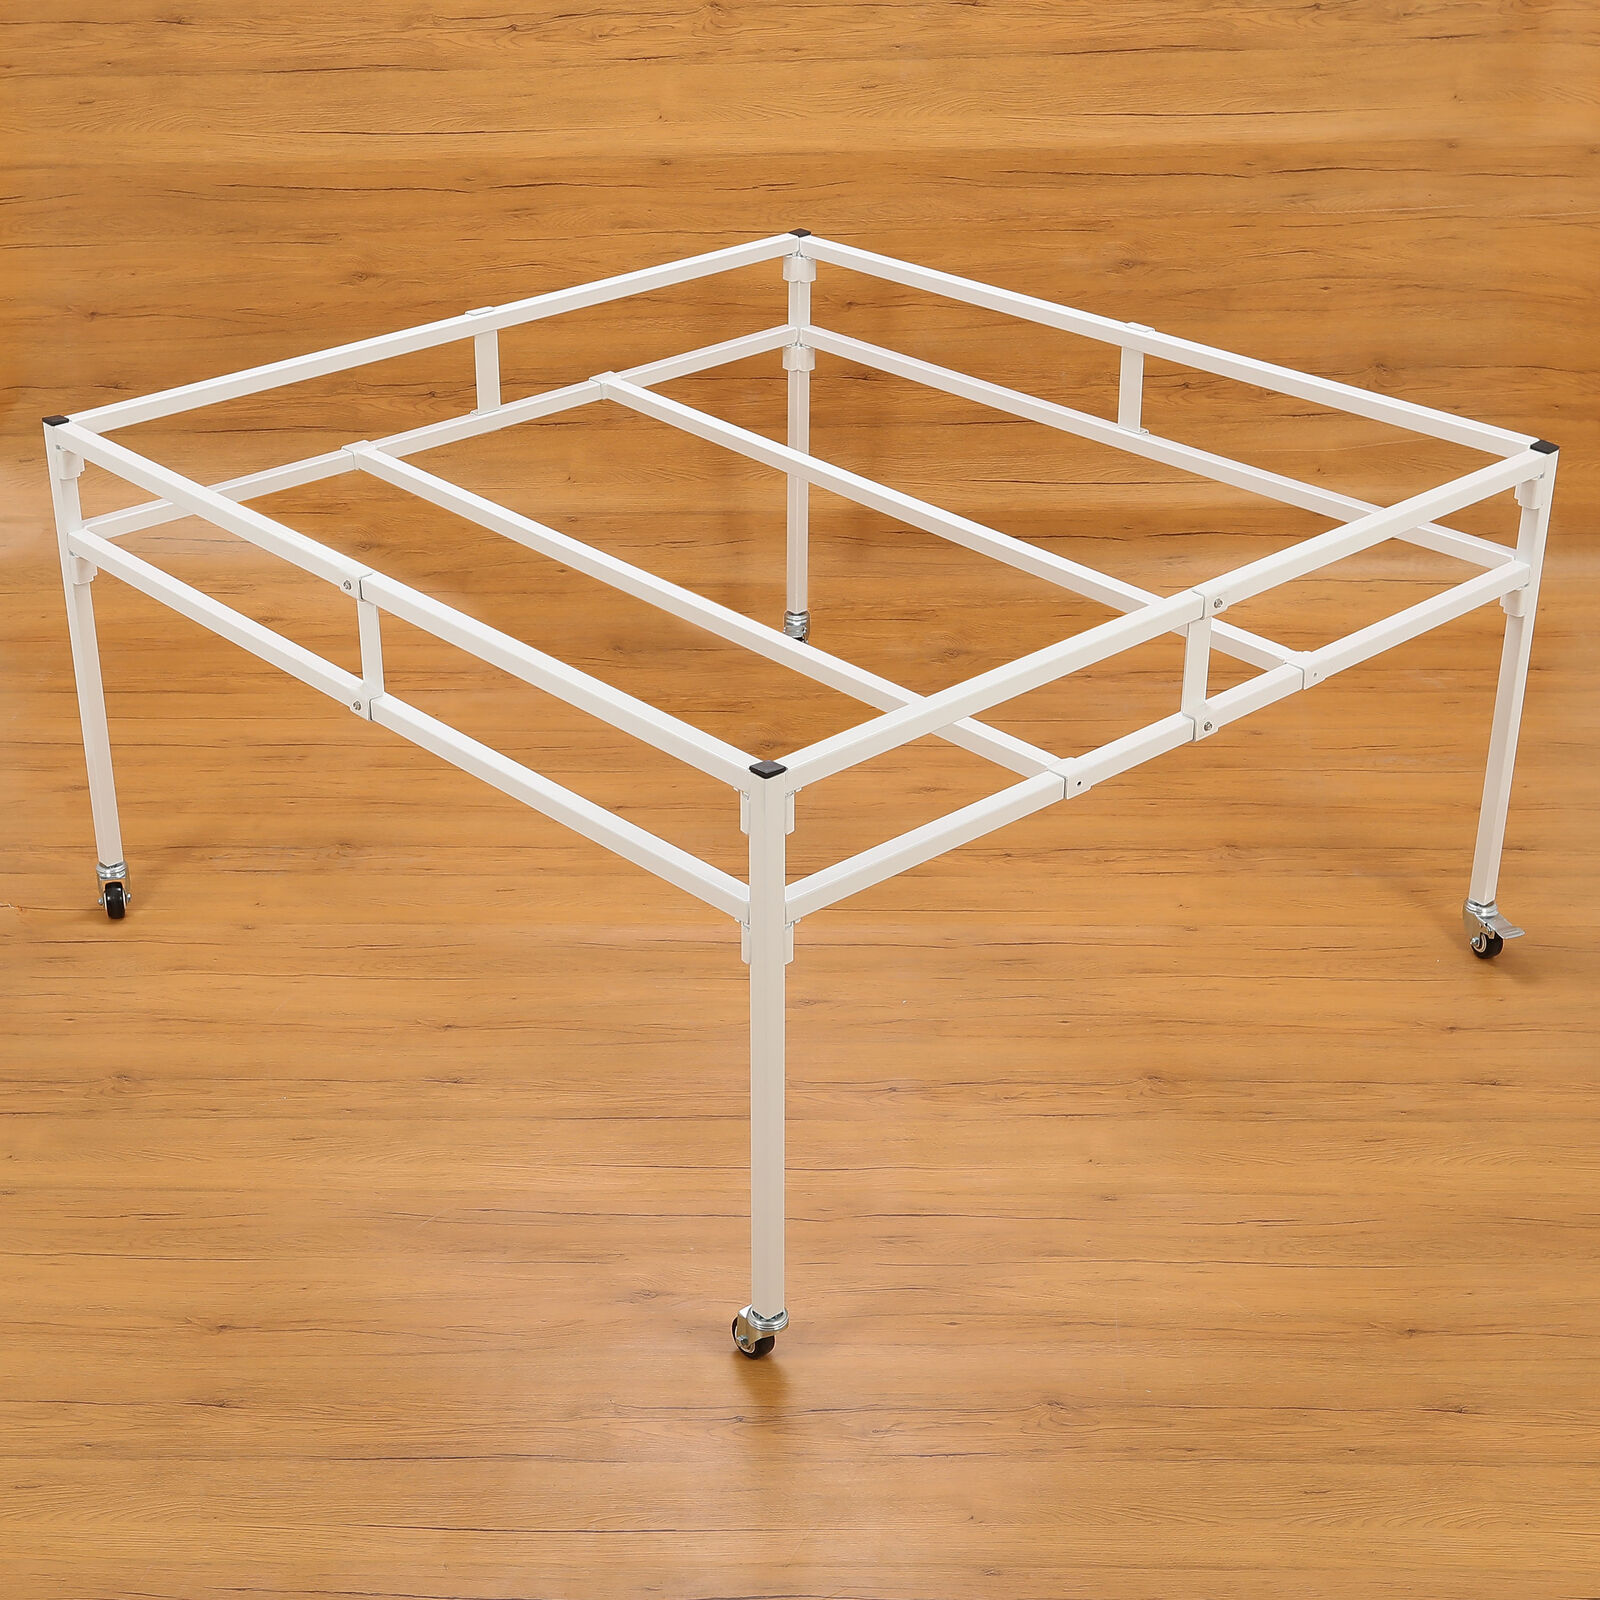 4'x8', 4'x4' White Rolling Flood Table Stand Hydroponic Germination Trays Plants